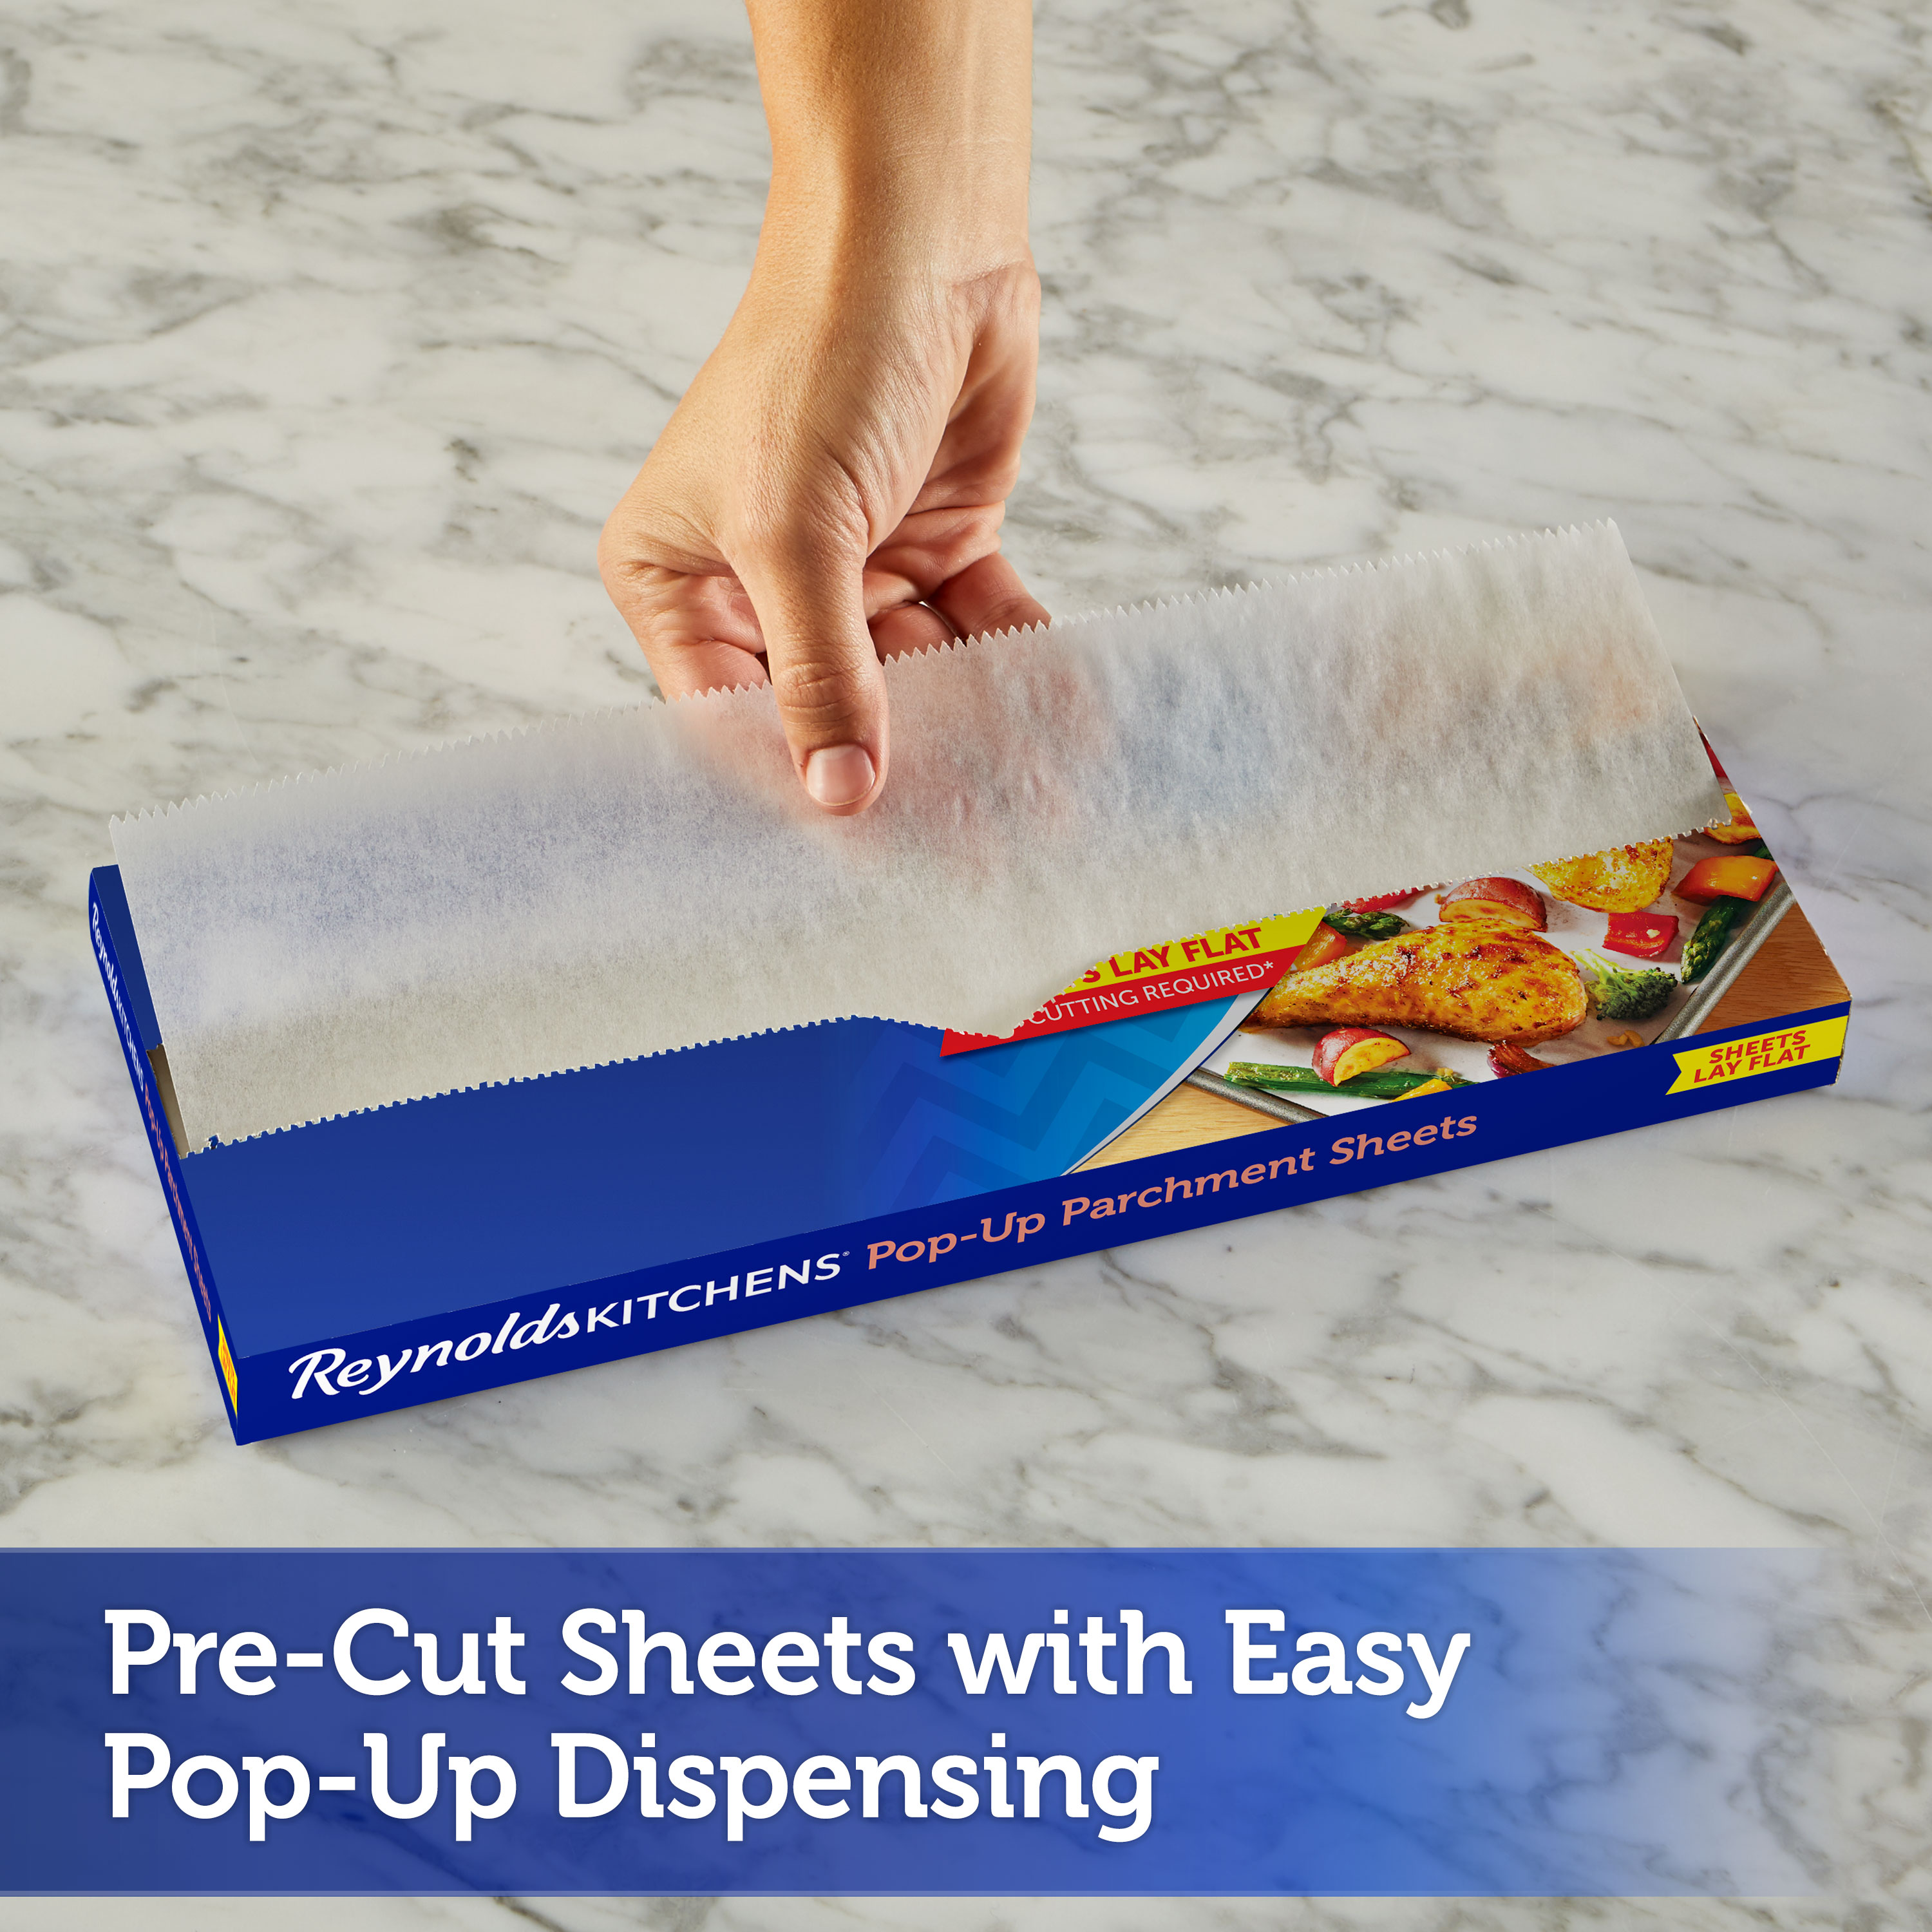 Reynolds Kitchens Pop-Up Parchment Paper Sheets, 10.7 x 13.6 Inches, 35 Count - image 3 of 6